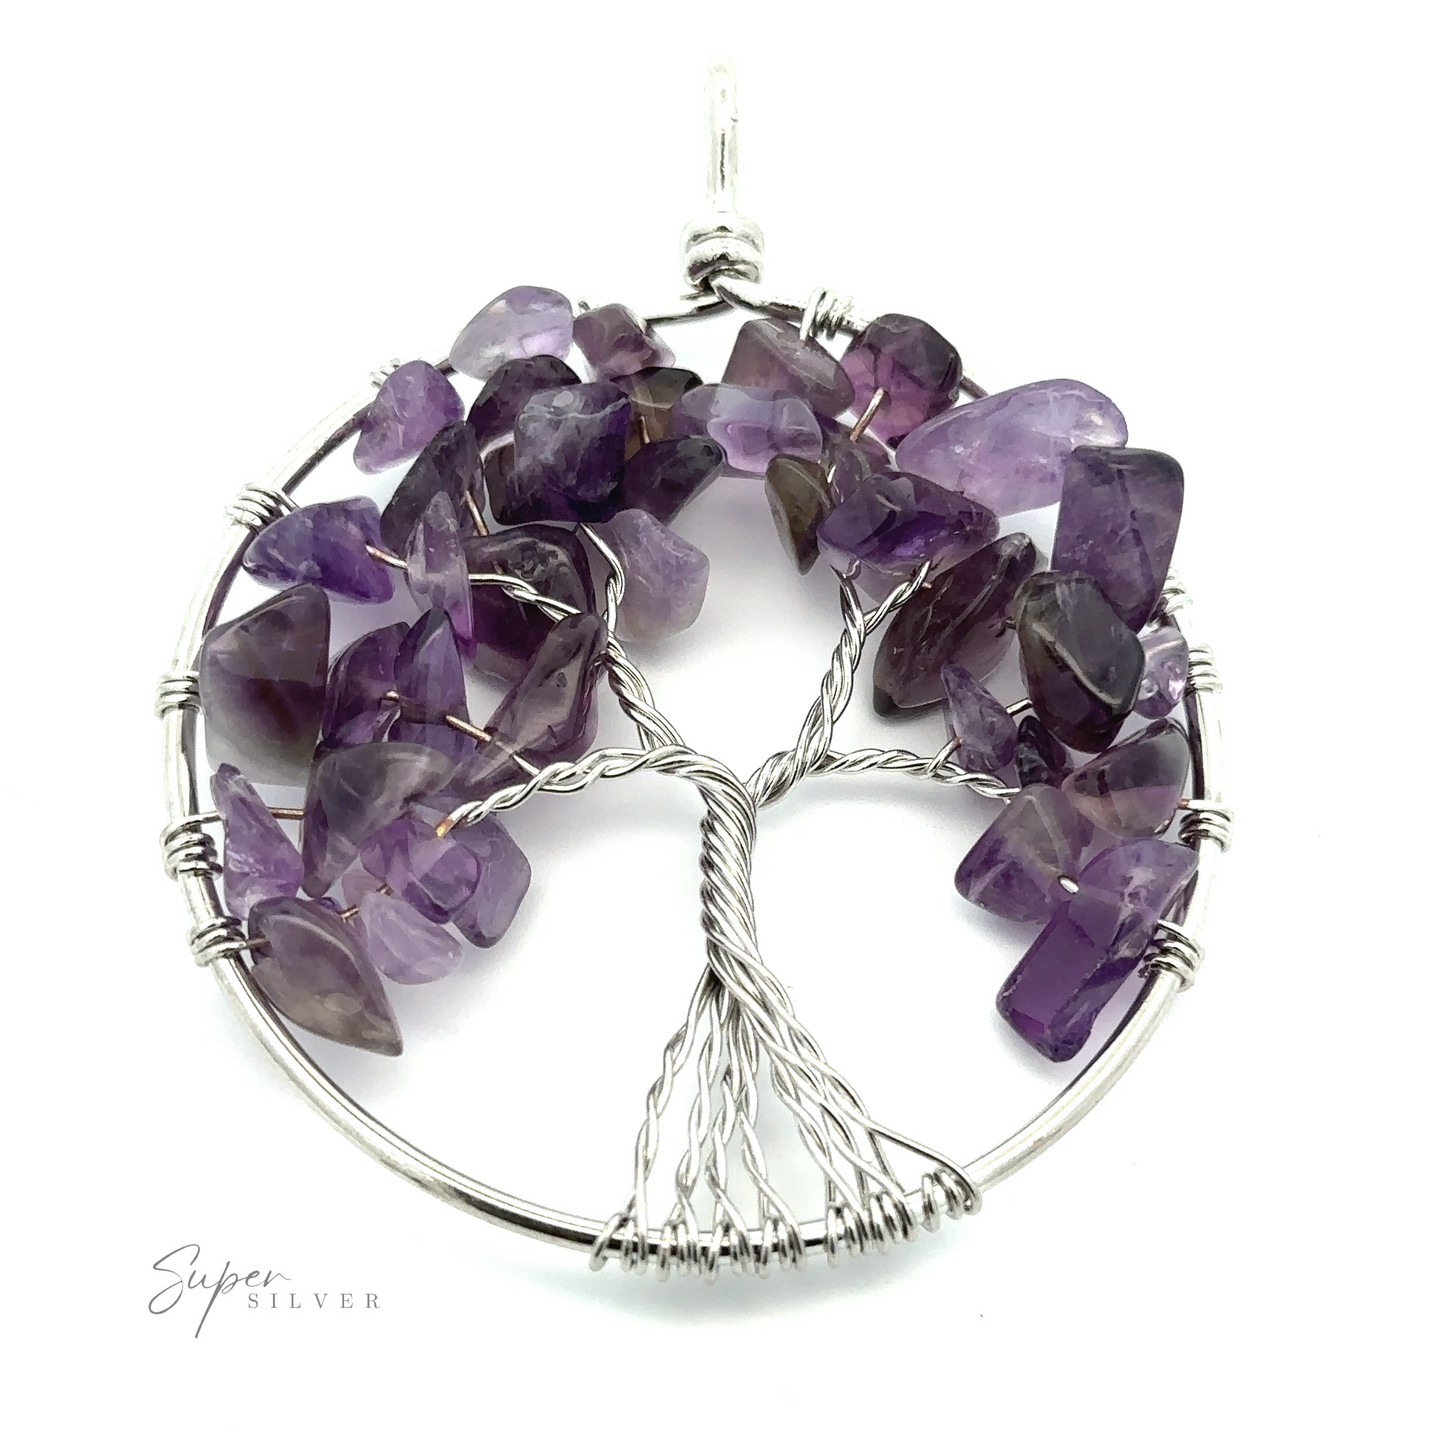 
                  
                    A Wire Wrapped Tree of Life Pendant crafted from a silver wire, adorned with clusters of amethyst gemstones in a circular frame. The brand "Super Silver" is elegantly visible at the bottom left.
                  
                